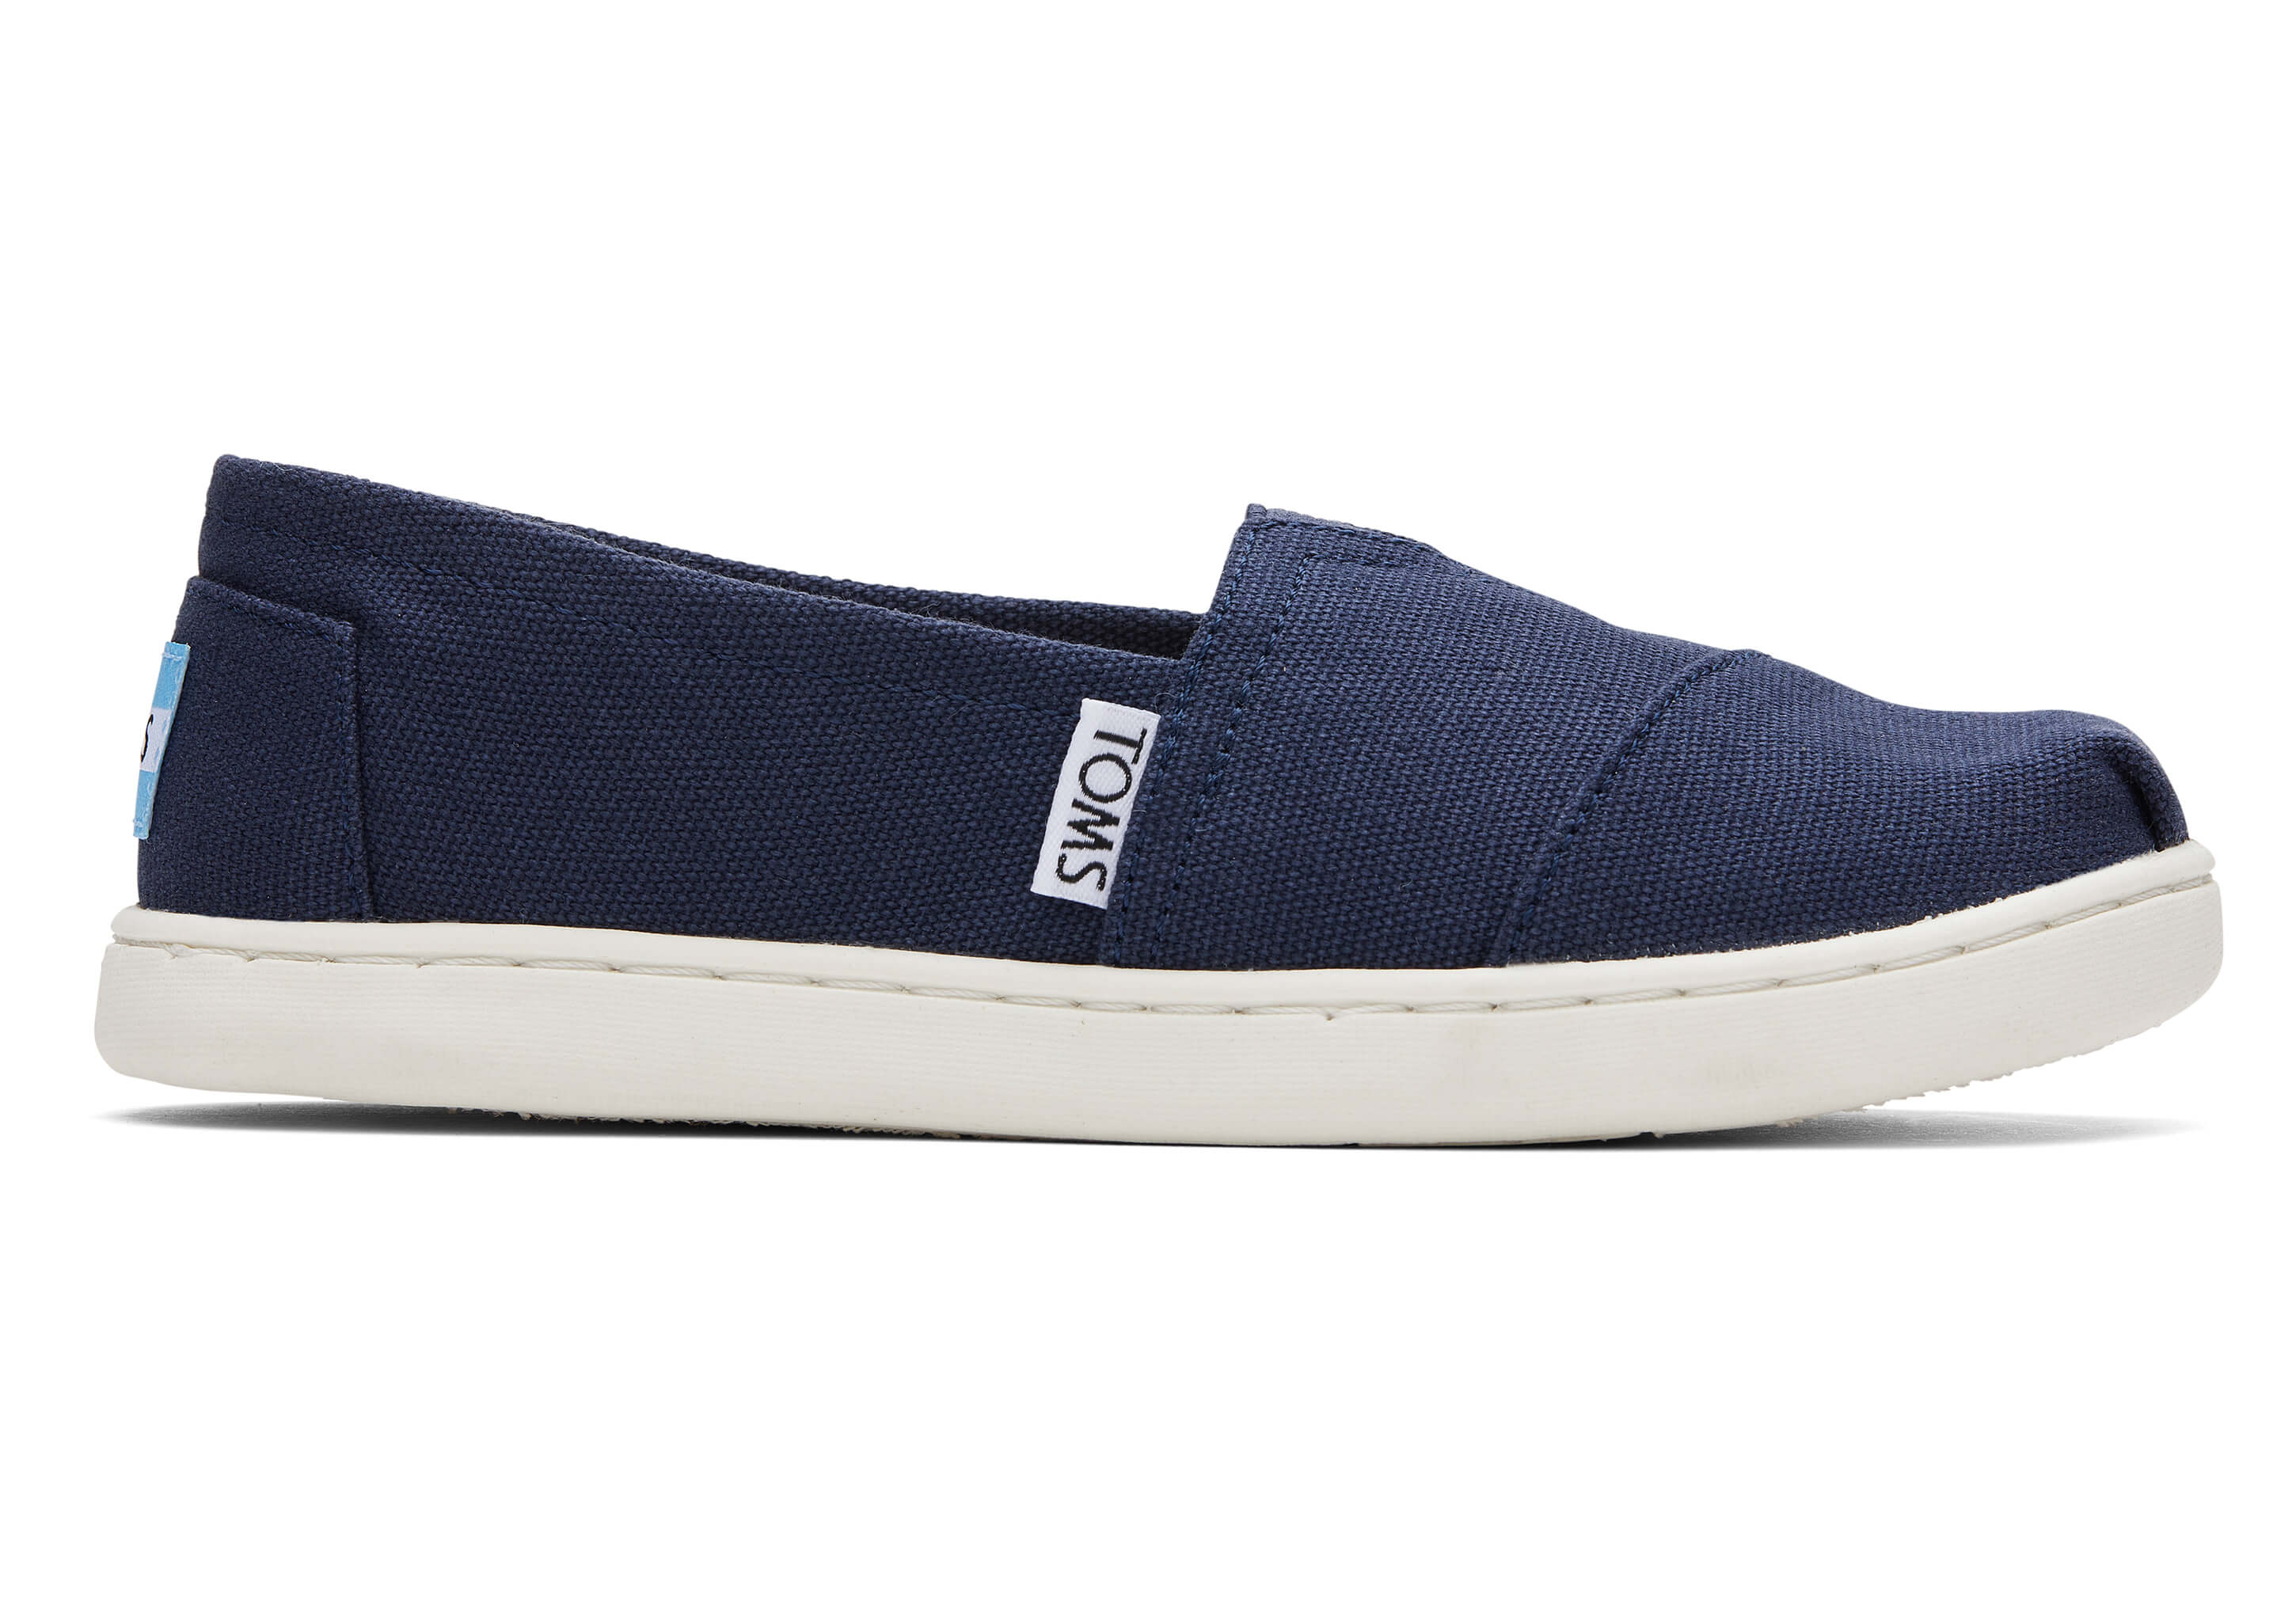 Details about   Toms Kids/Youth Classic Canvas Slip On Shoes 10010532 Navy Blue 